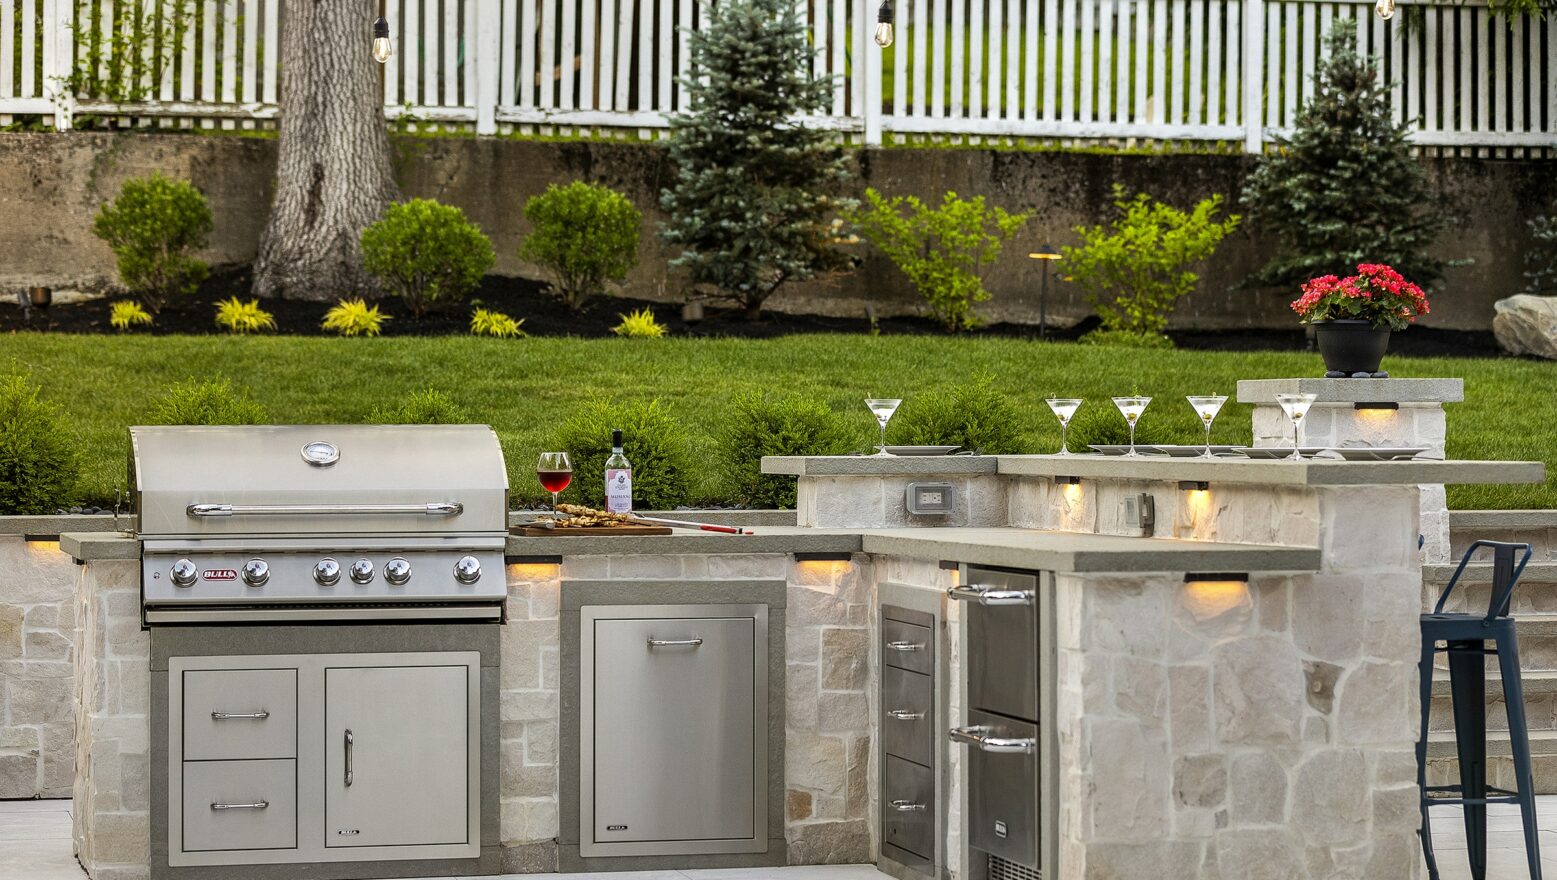 Outdoor kitchen in Needham, Massachusetts with stainless steel gas grill from Bull Grills. Built by Dex by Terra.